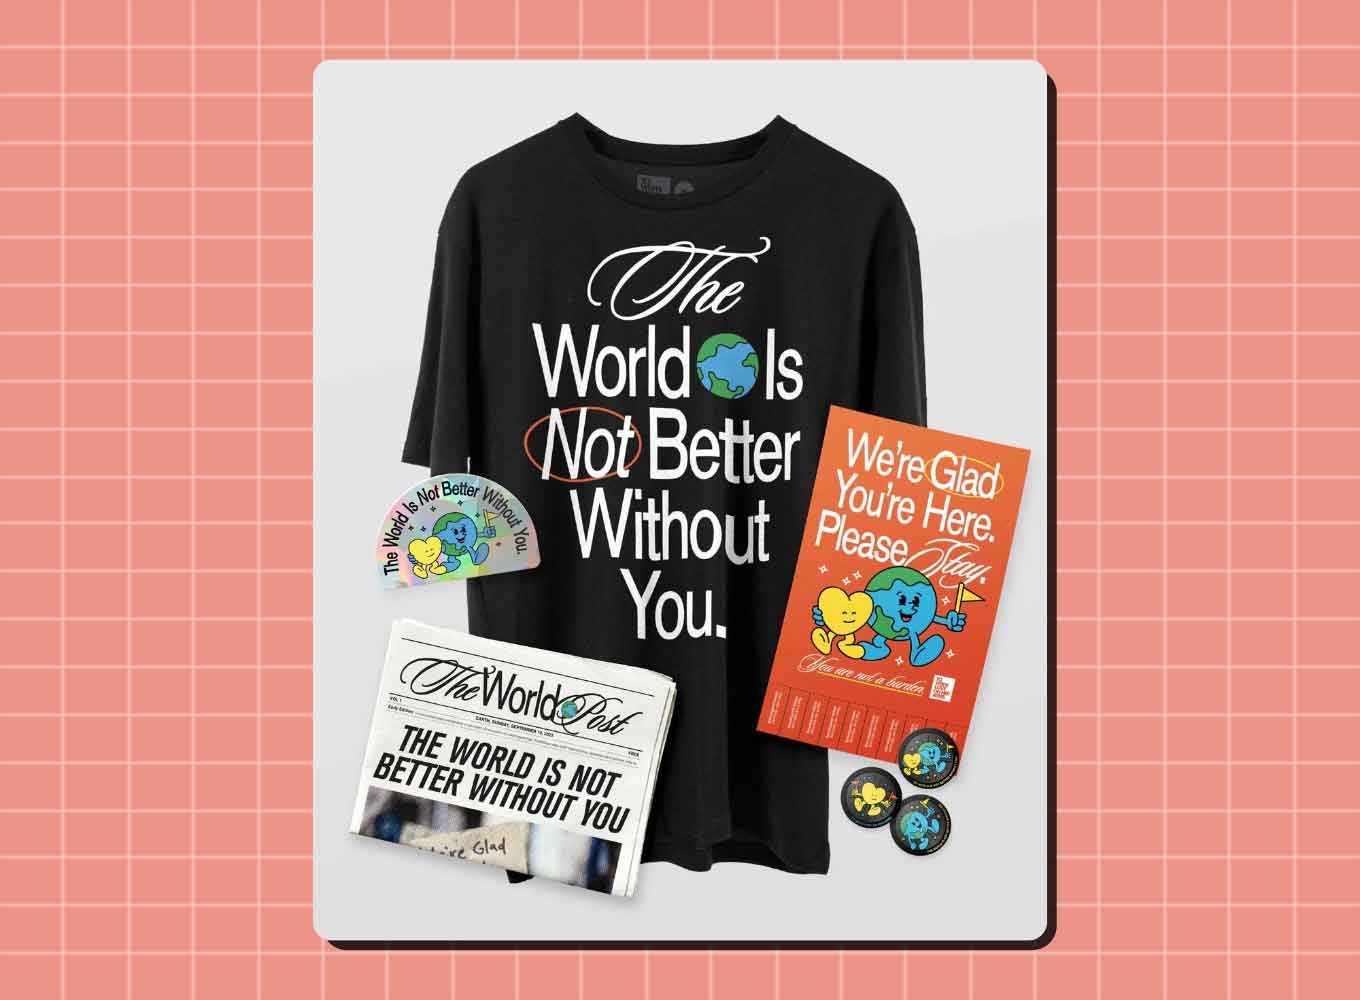 A t-shirt, poster, sticker, and newspaper in the Suicide Prevention Pack from TWLOHA